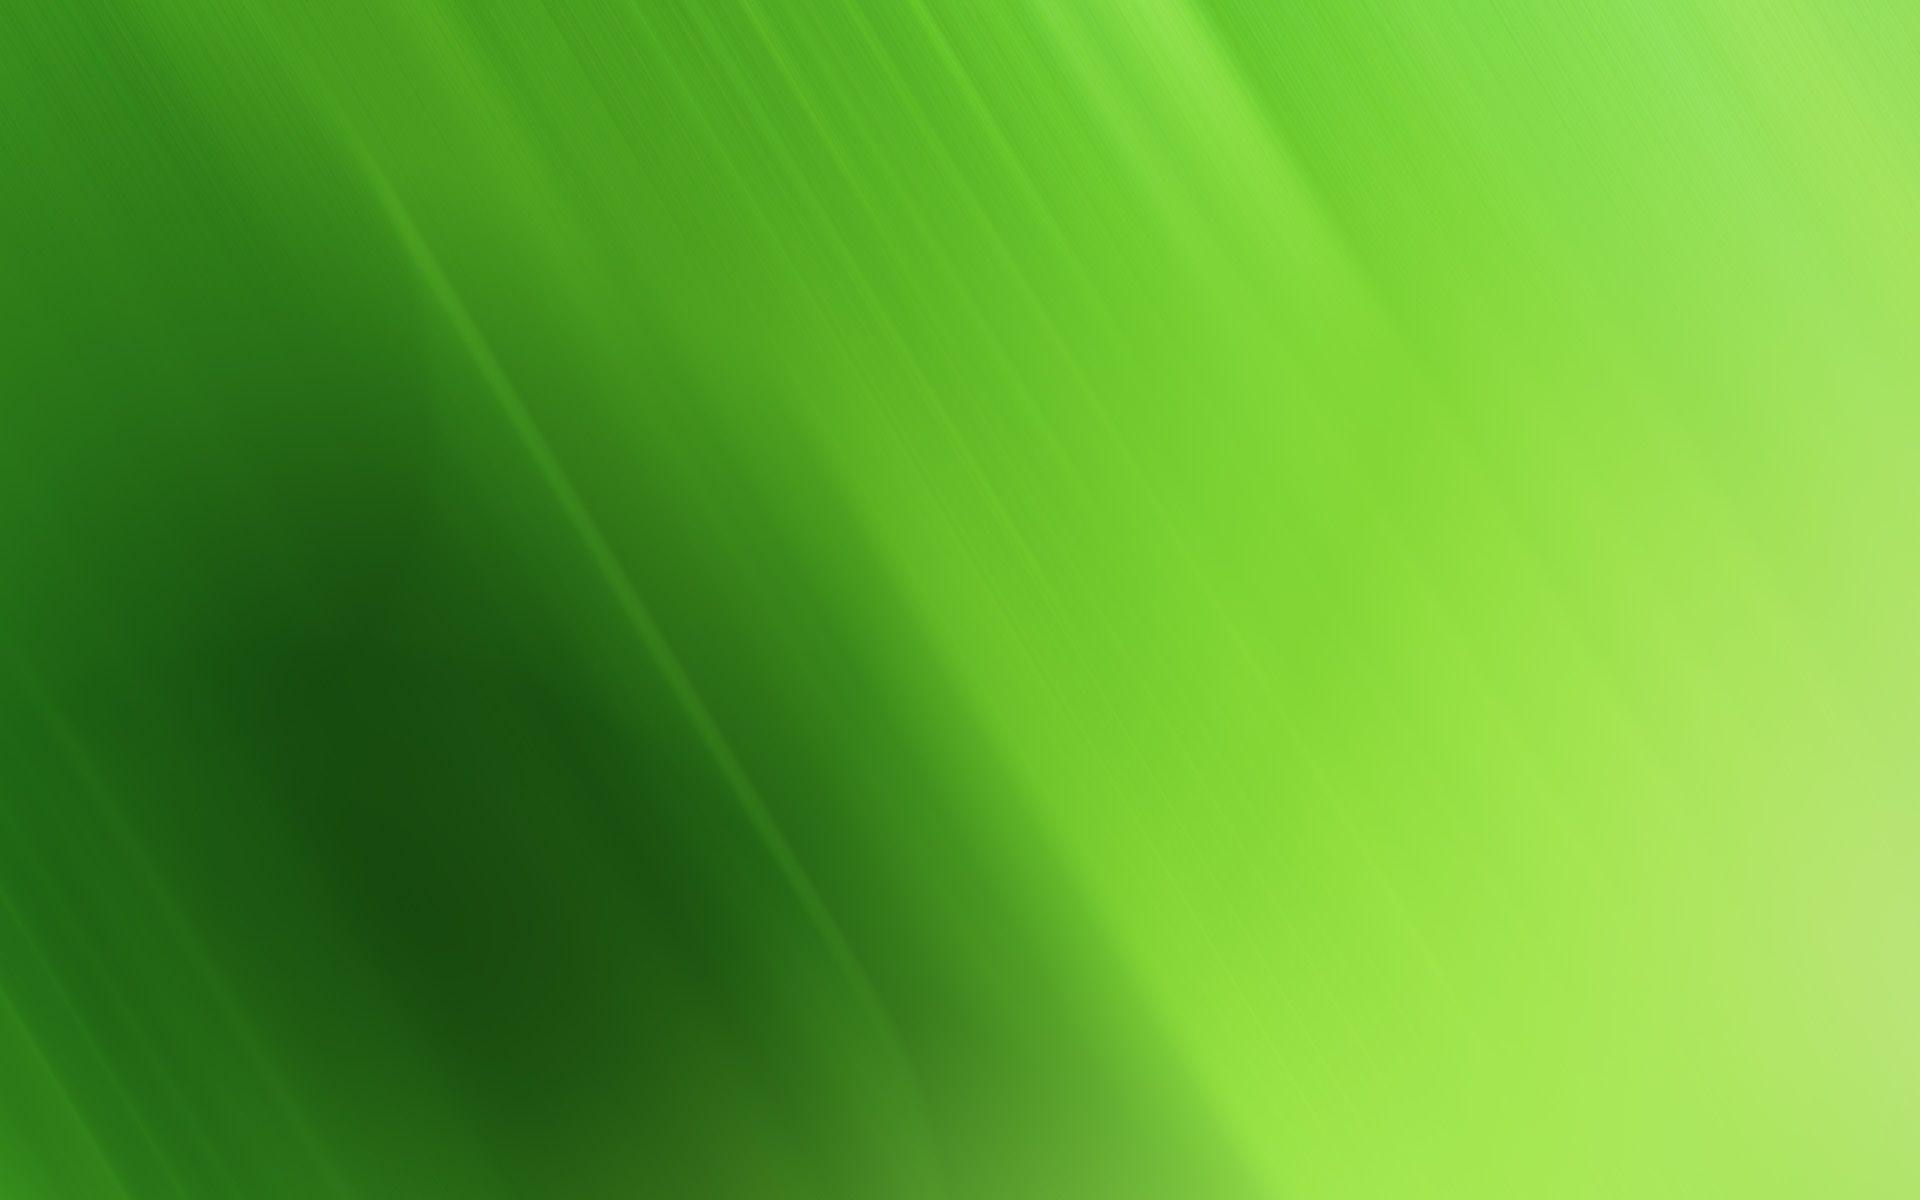 Free: Gradient background in green shades Free Vector - nohat.cc